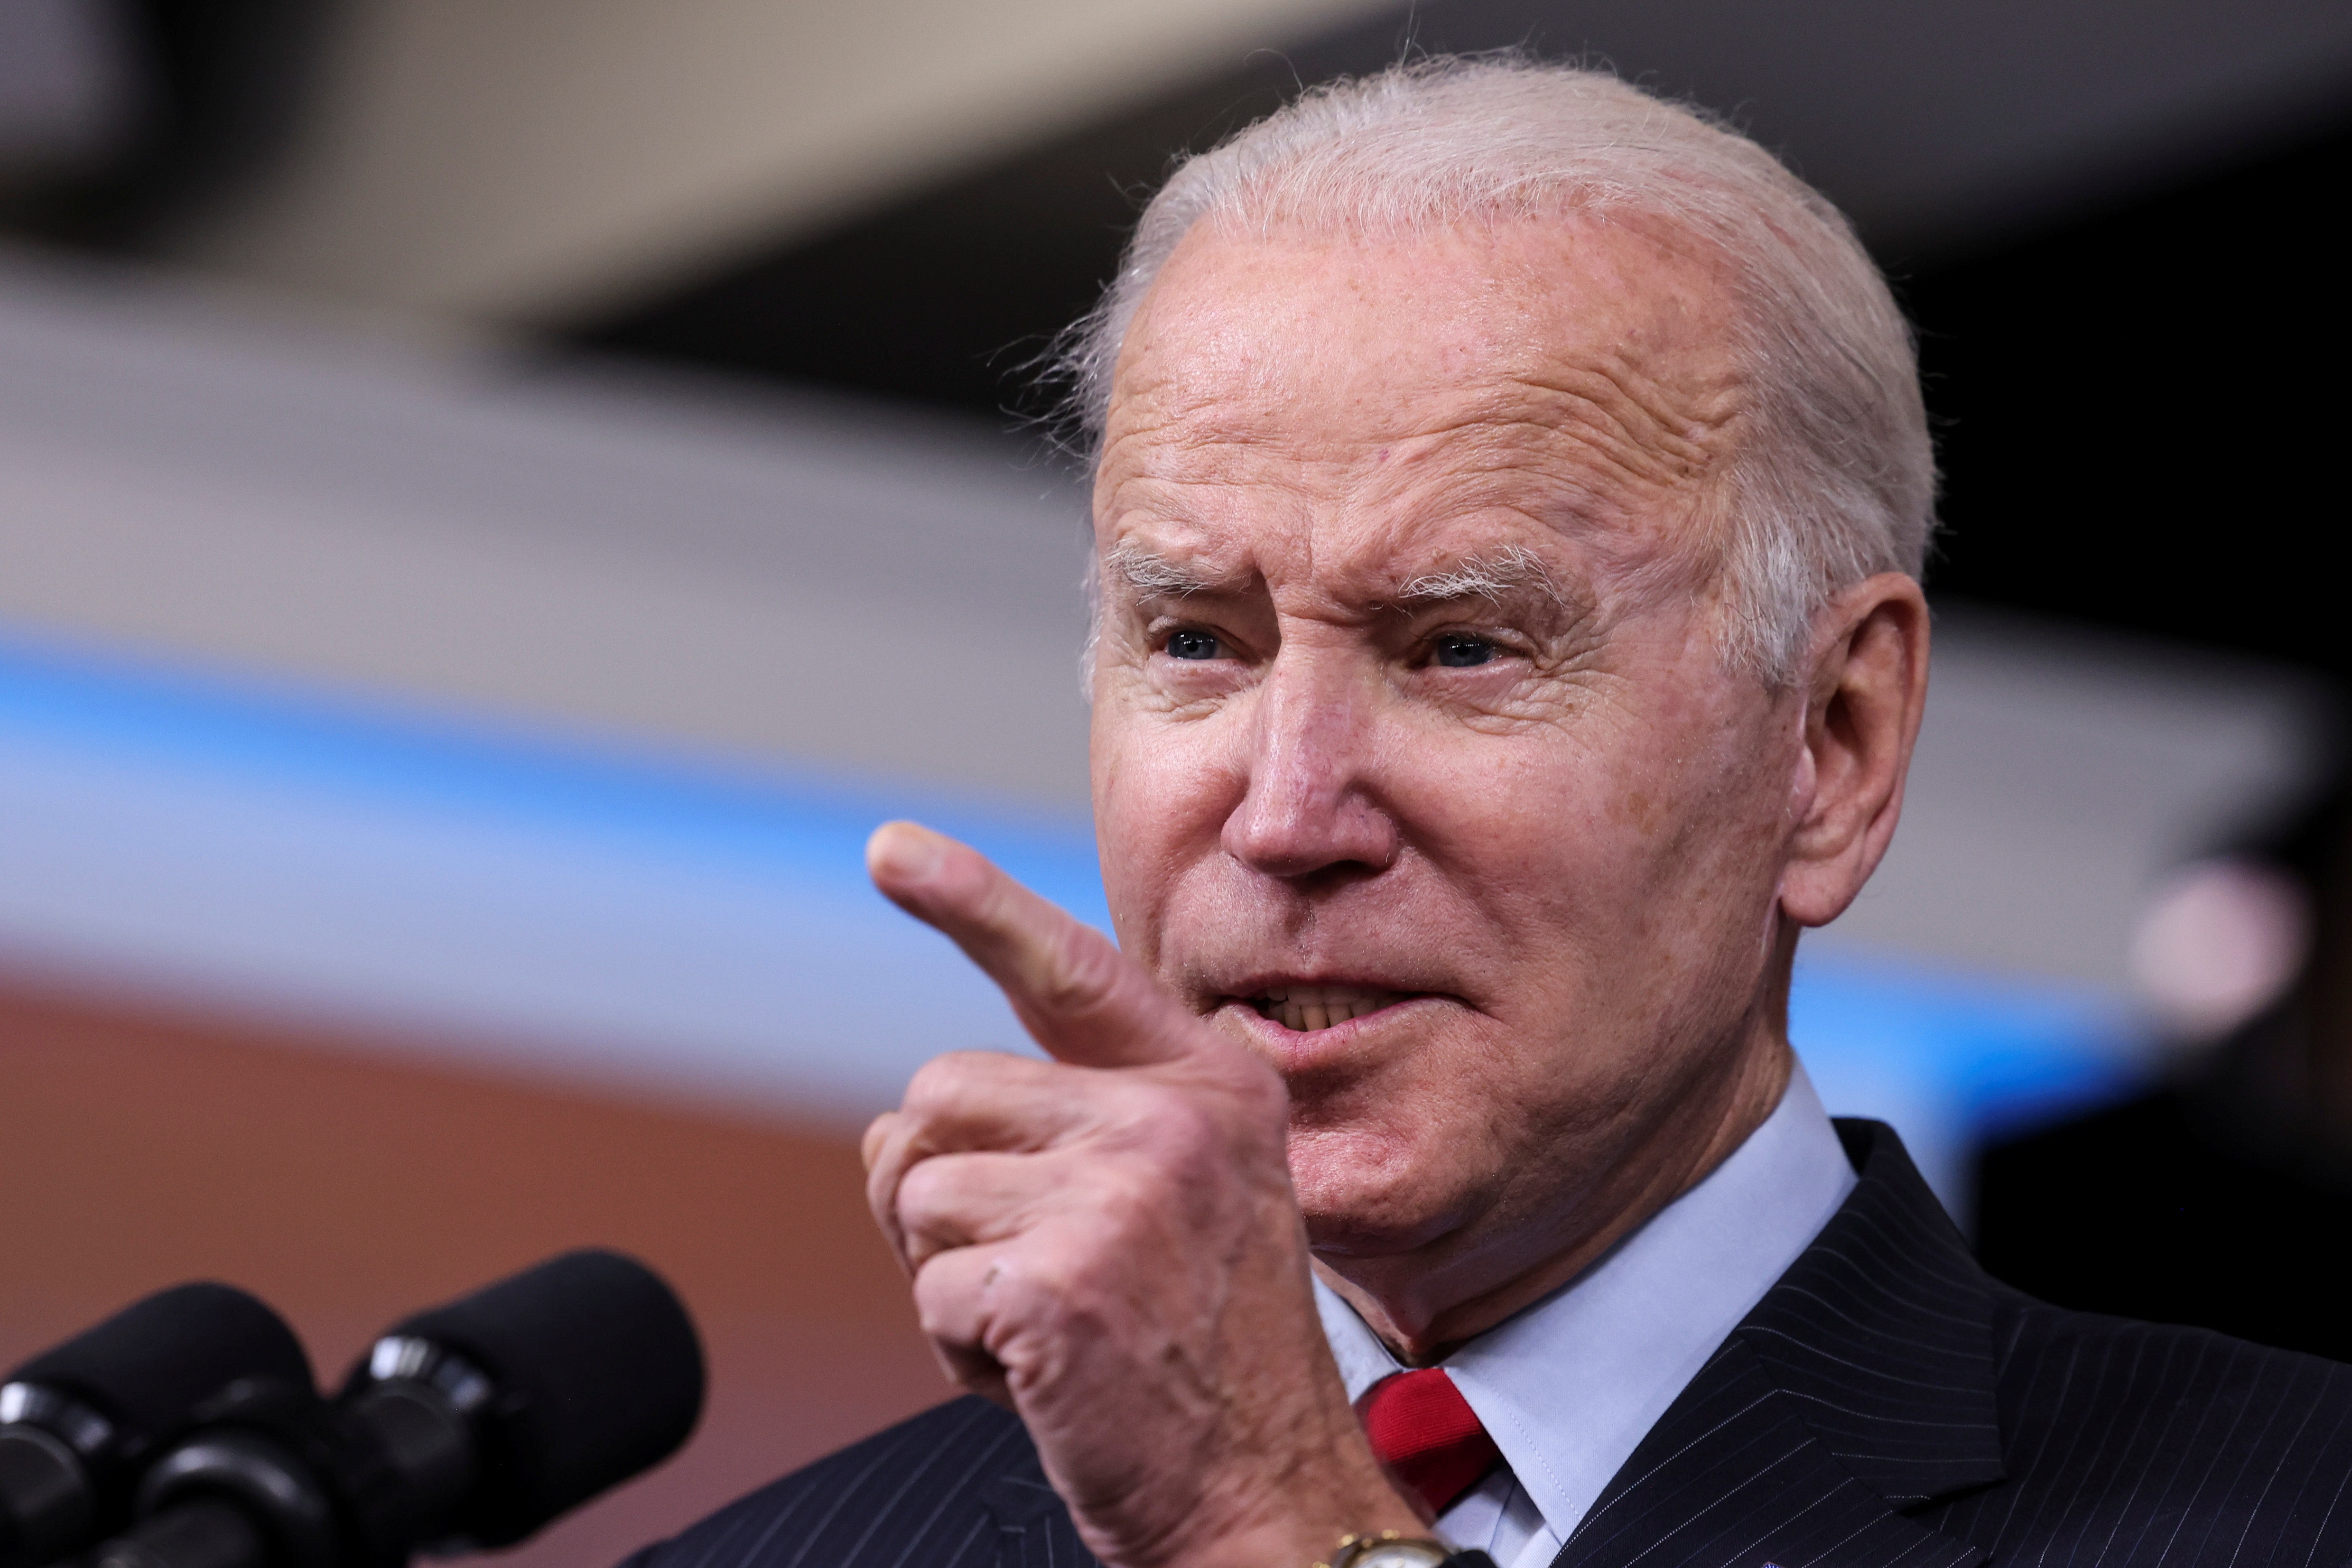 Biden says climate change policies not responsible for 'inflated gas prices'